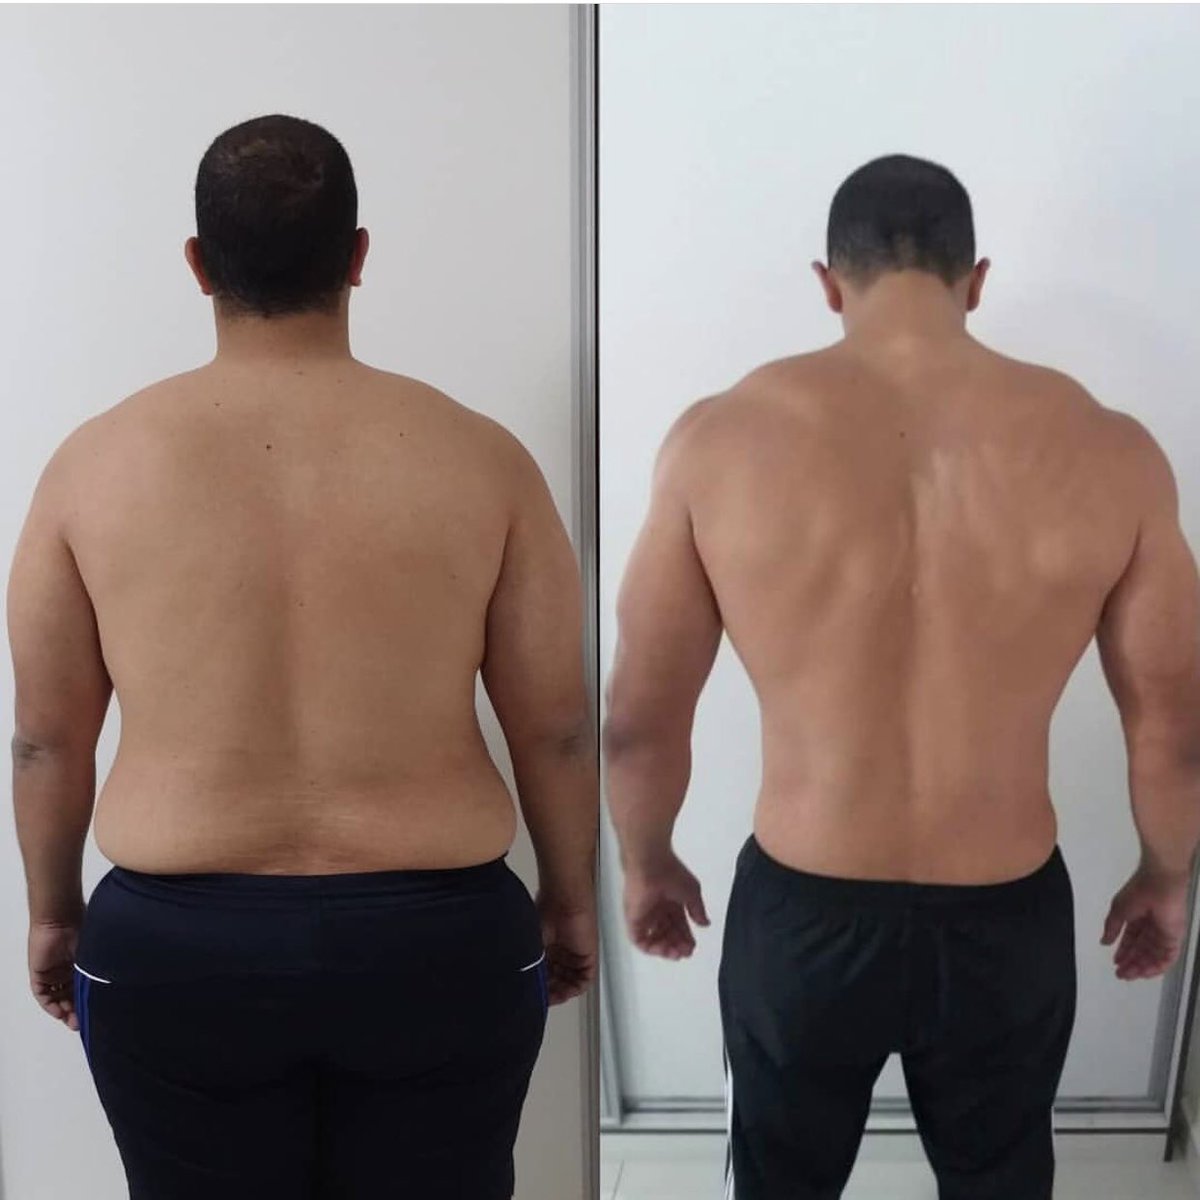 An amazing transformation by #diogoferreira 

#bodybuilding #diet #workout  #personaltraining #personaltrainer #train #trainwell #healthy #healthyliving #training #fitness #fit #fitnesstraininghealthyliving #fitnesstraining #trainingfitness #traininghealthy #healthytraining